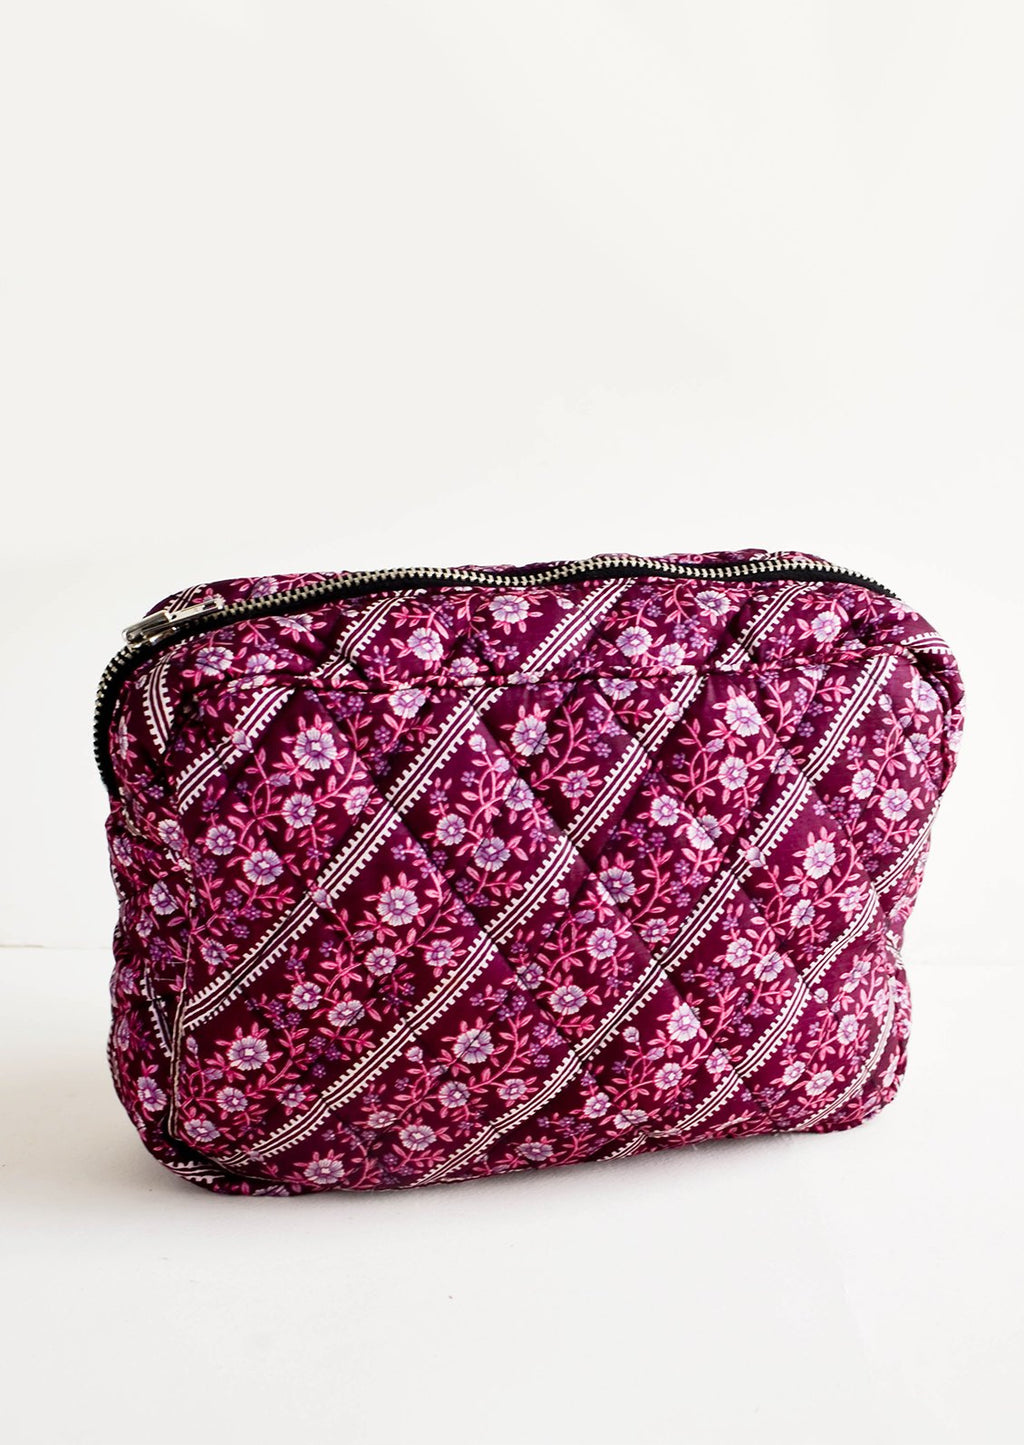 Large / Merlot Floral Stripe: Flat and rectangular makeup travel bag with zip closure in purple floral